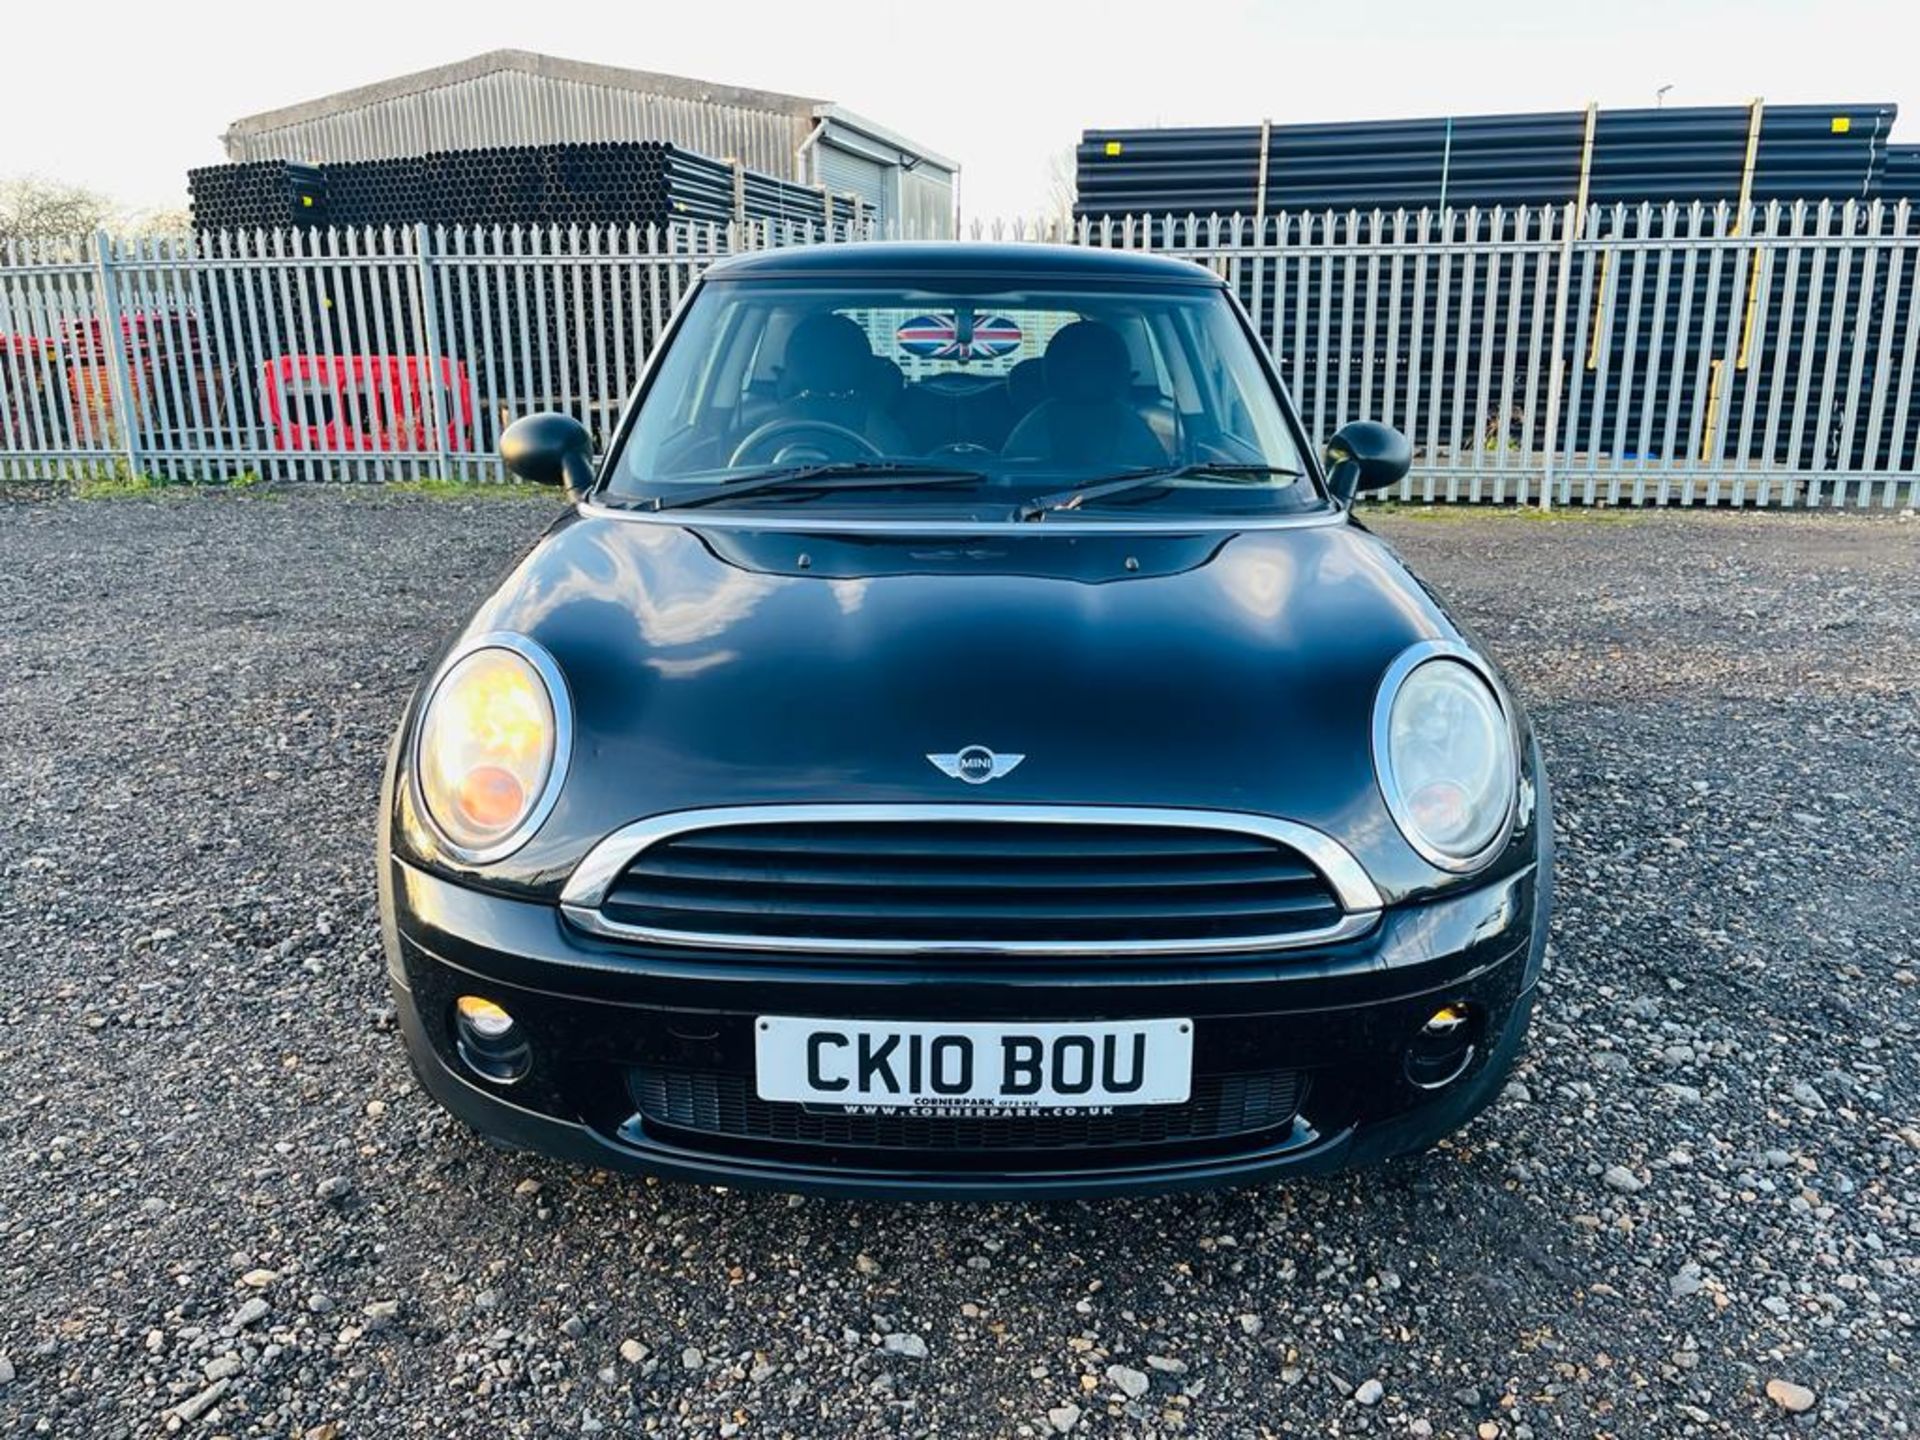 Mini One 1.6 Start/Stop 100 2010 '10 Reg' ' Very Economical' Only 108,430 - Image 2 of 26